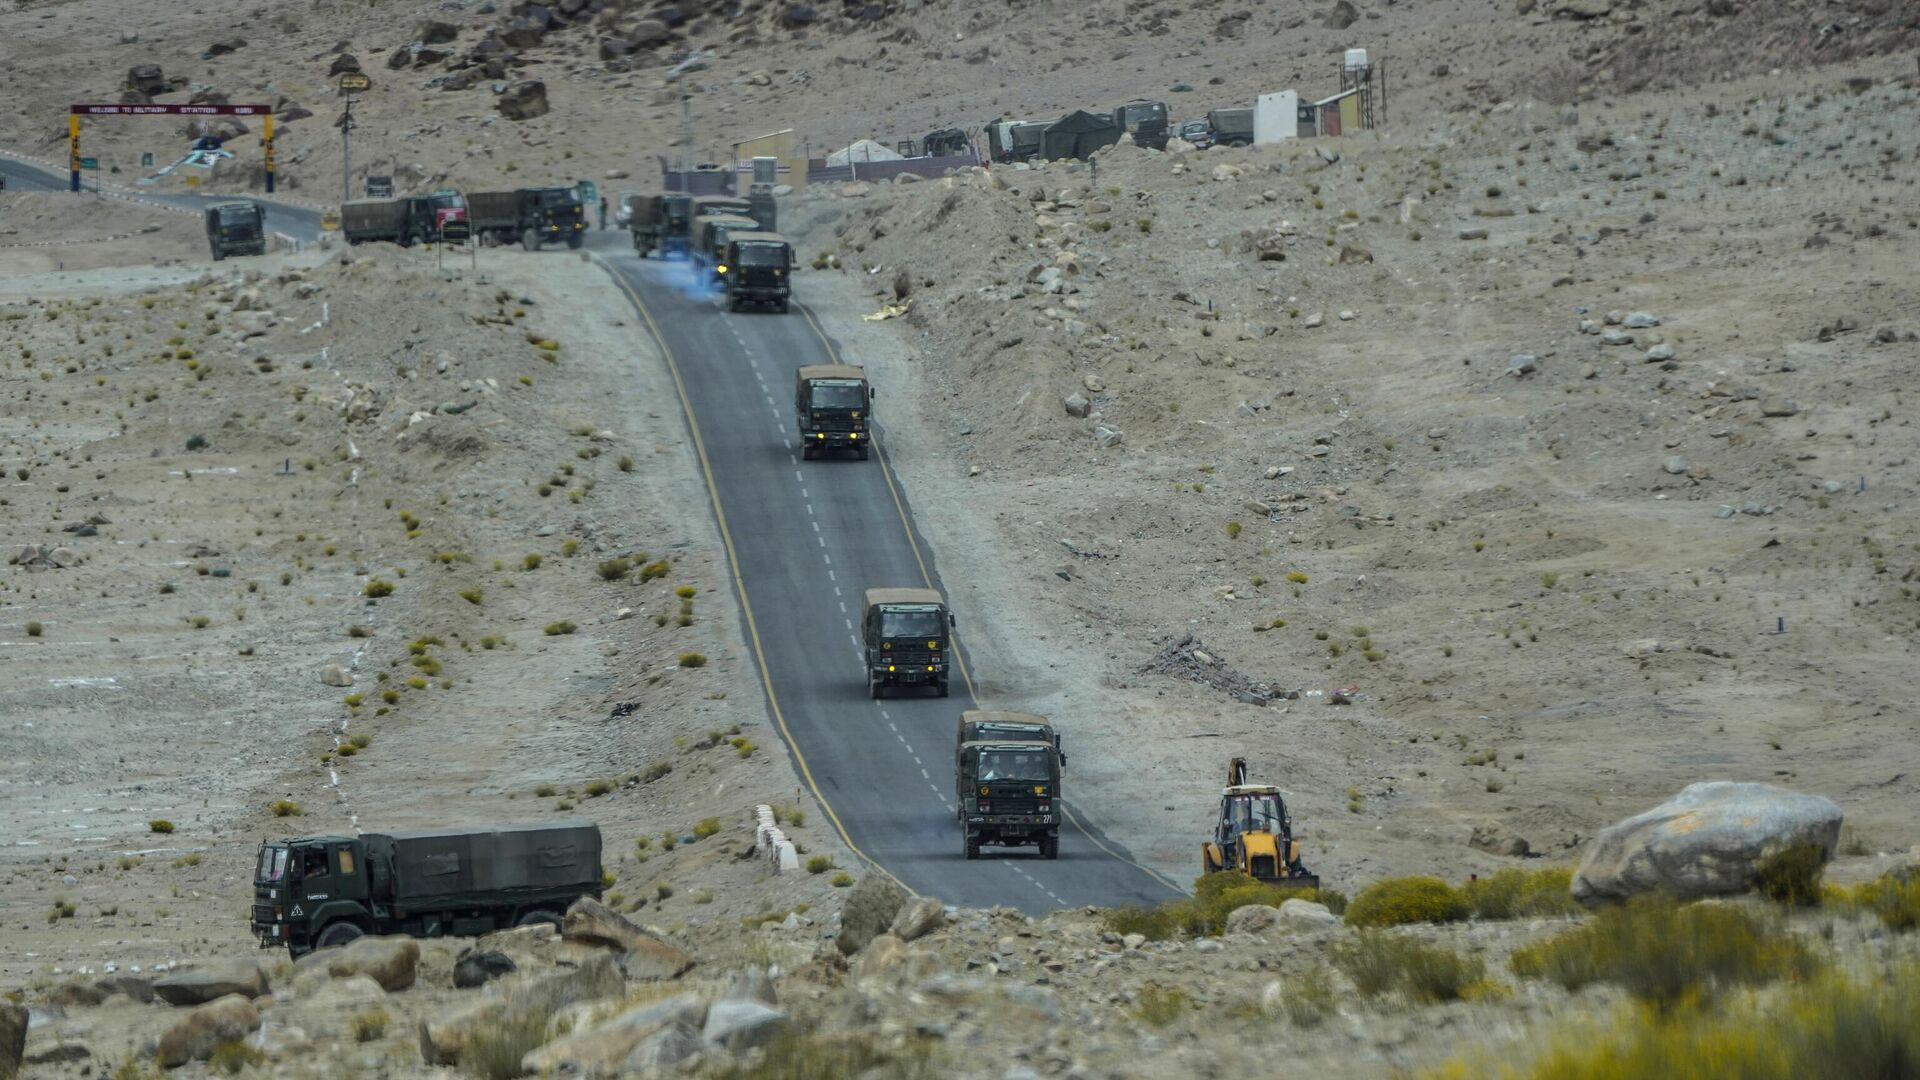 Indian army vehicles move in a convoy in the cold desert region of Ladakh, India, Tuesday, Sept. 20, 2022. Nestled between India, Pakistan and China, Ladakh has not just faced territorial disputes but also stark climate change. - Sputnik India, 1920, 06.01.2023